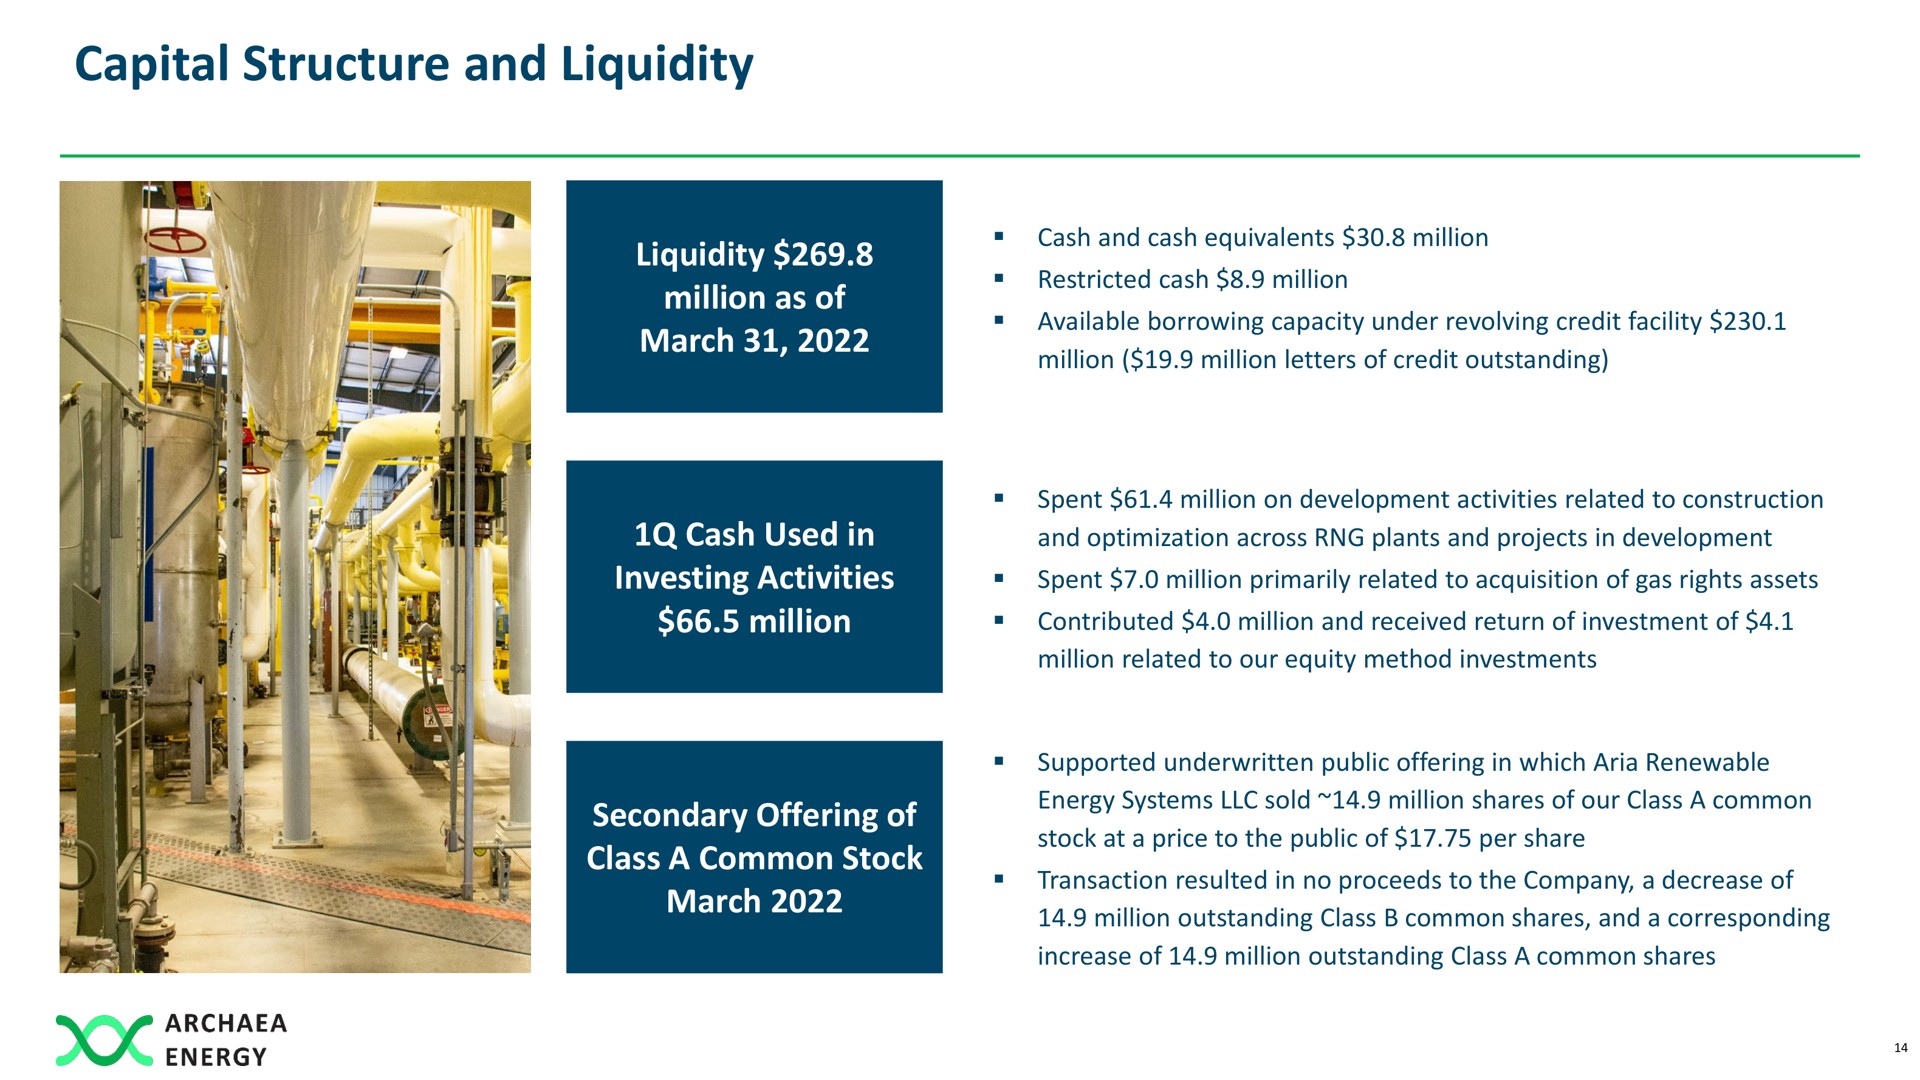 capital structure and liquidity | Archaea Energy